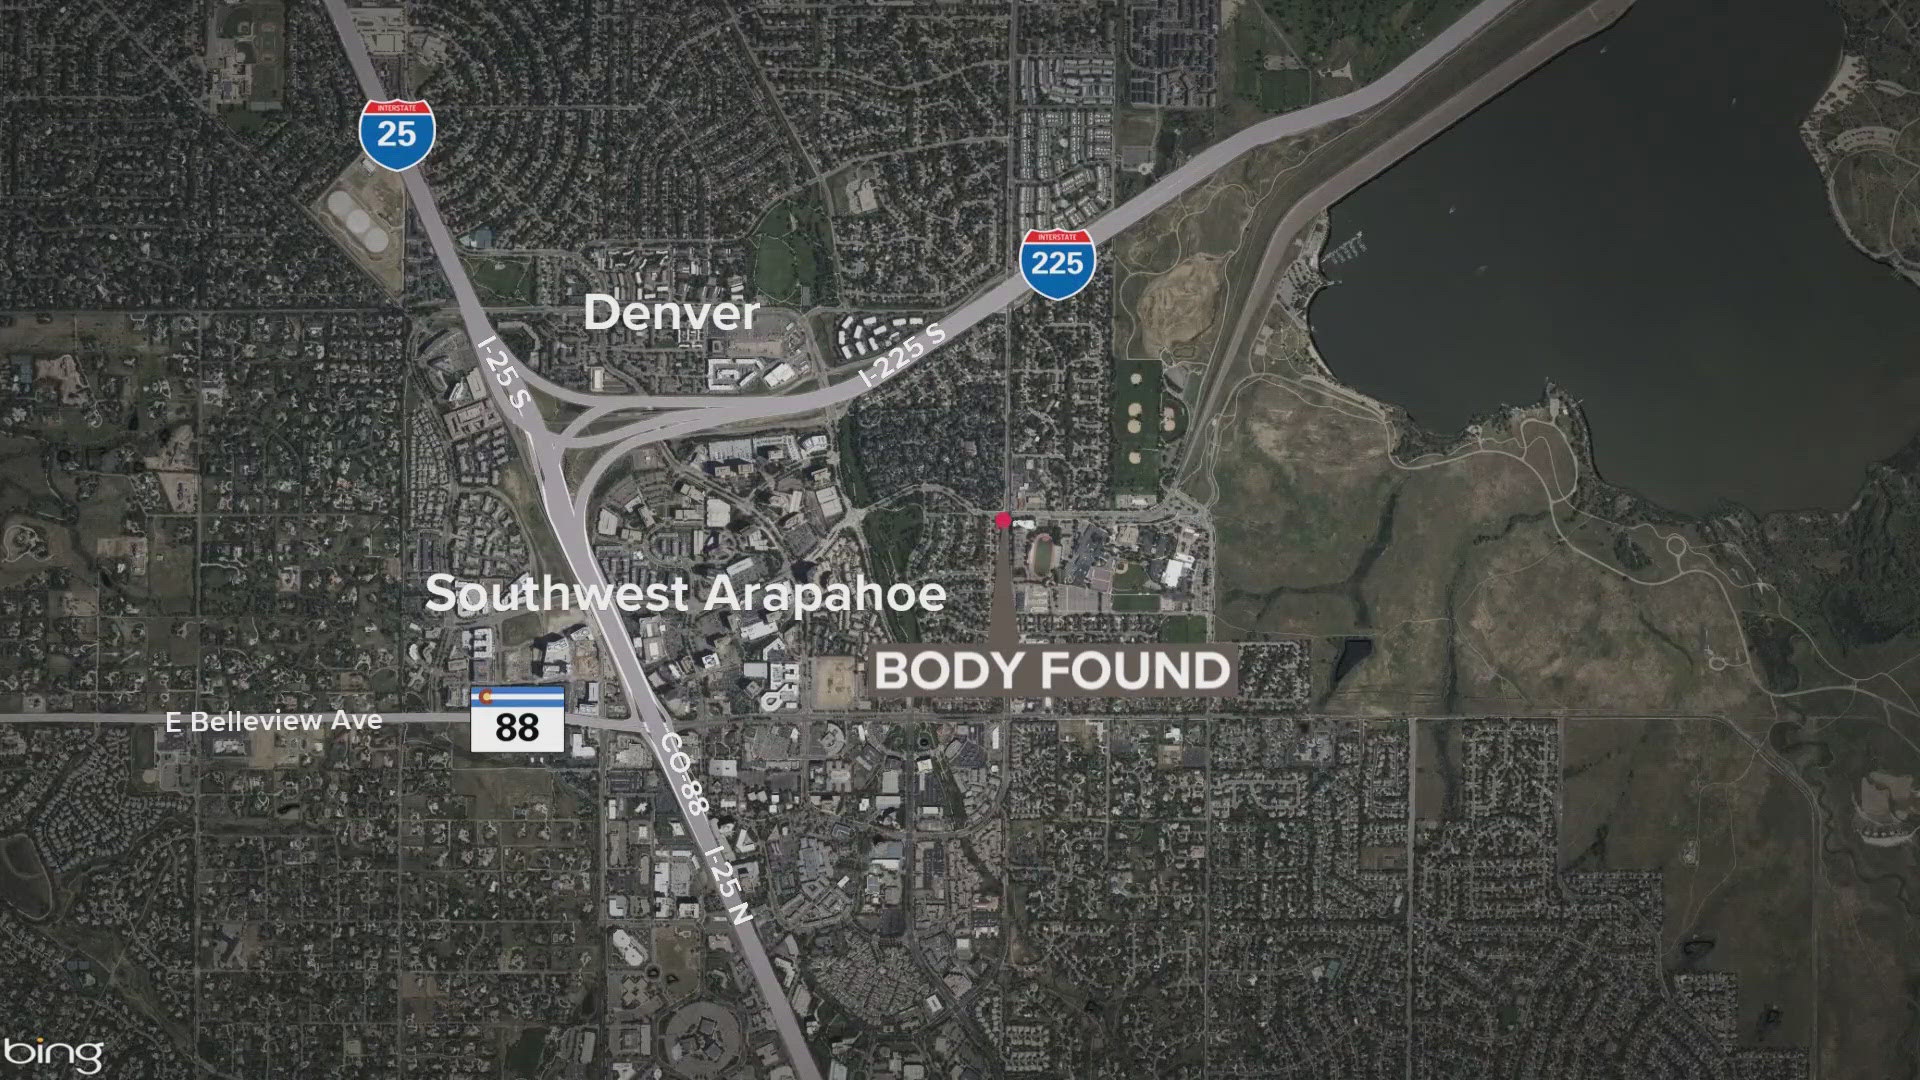 Greenwood Village Police in Colorado said a young adult man's body was found in the area of East Union Avenue and South Yosemite Street.